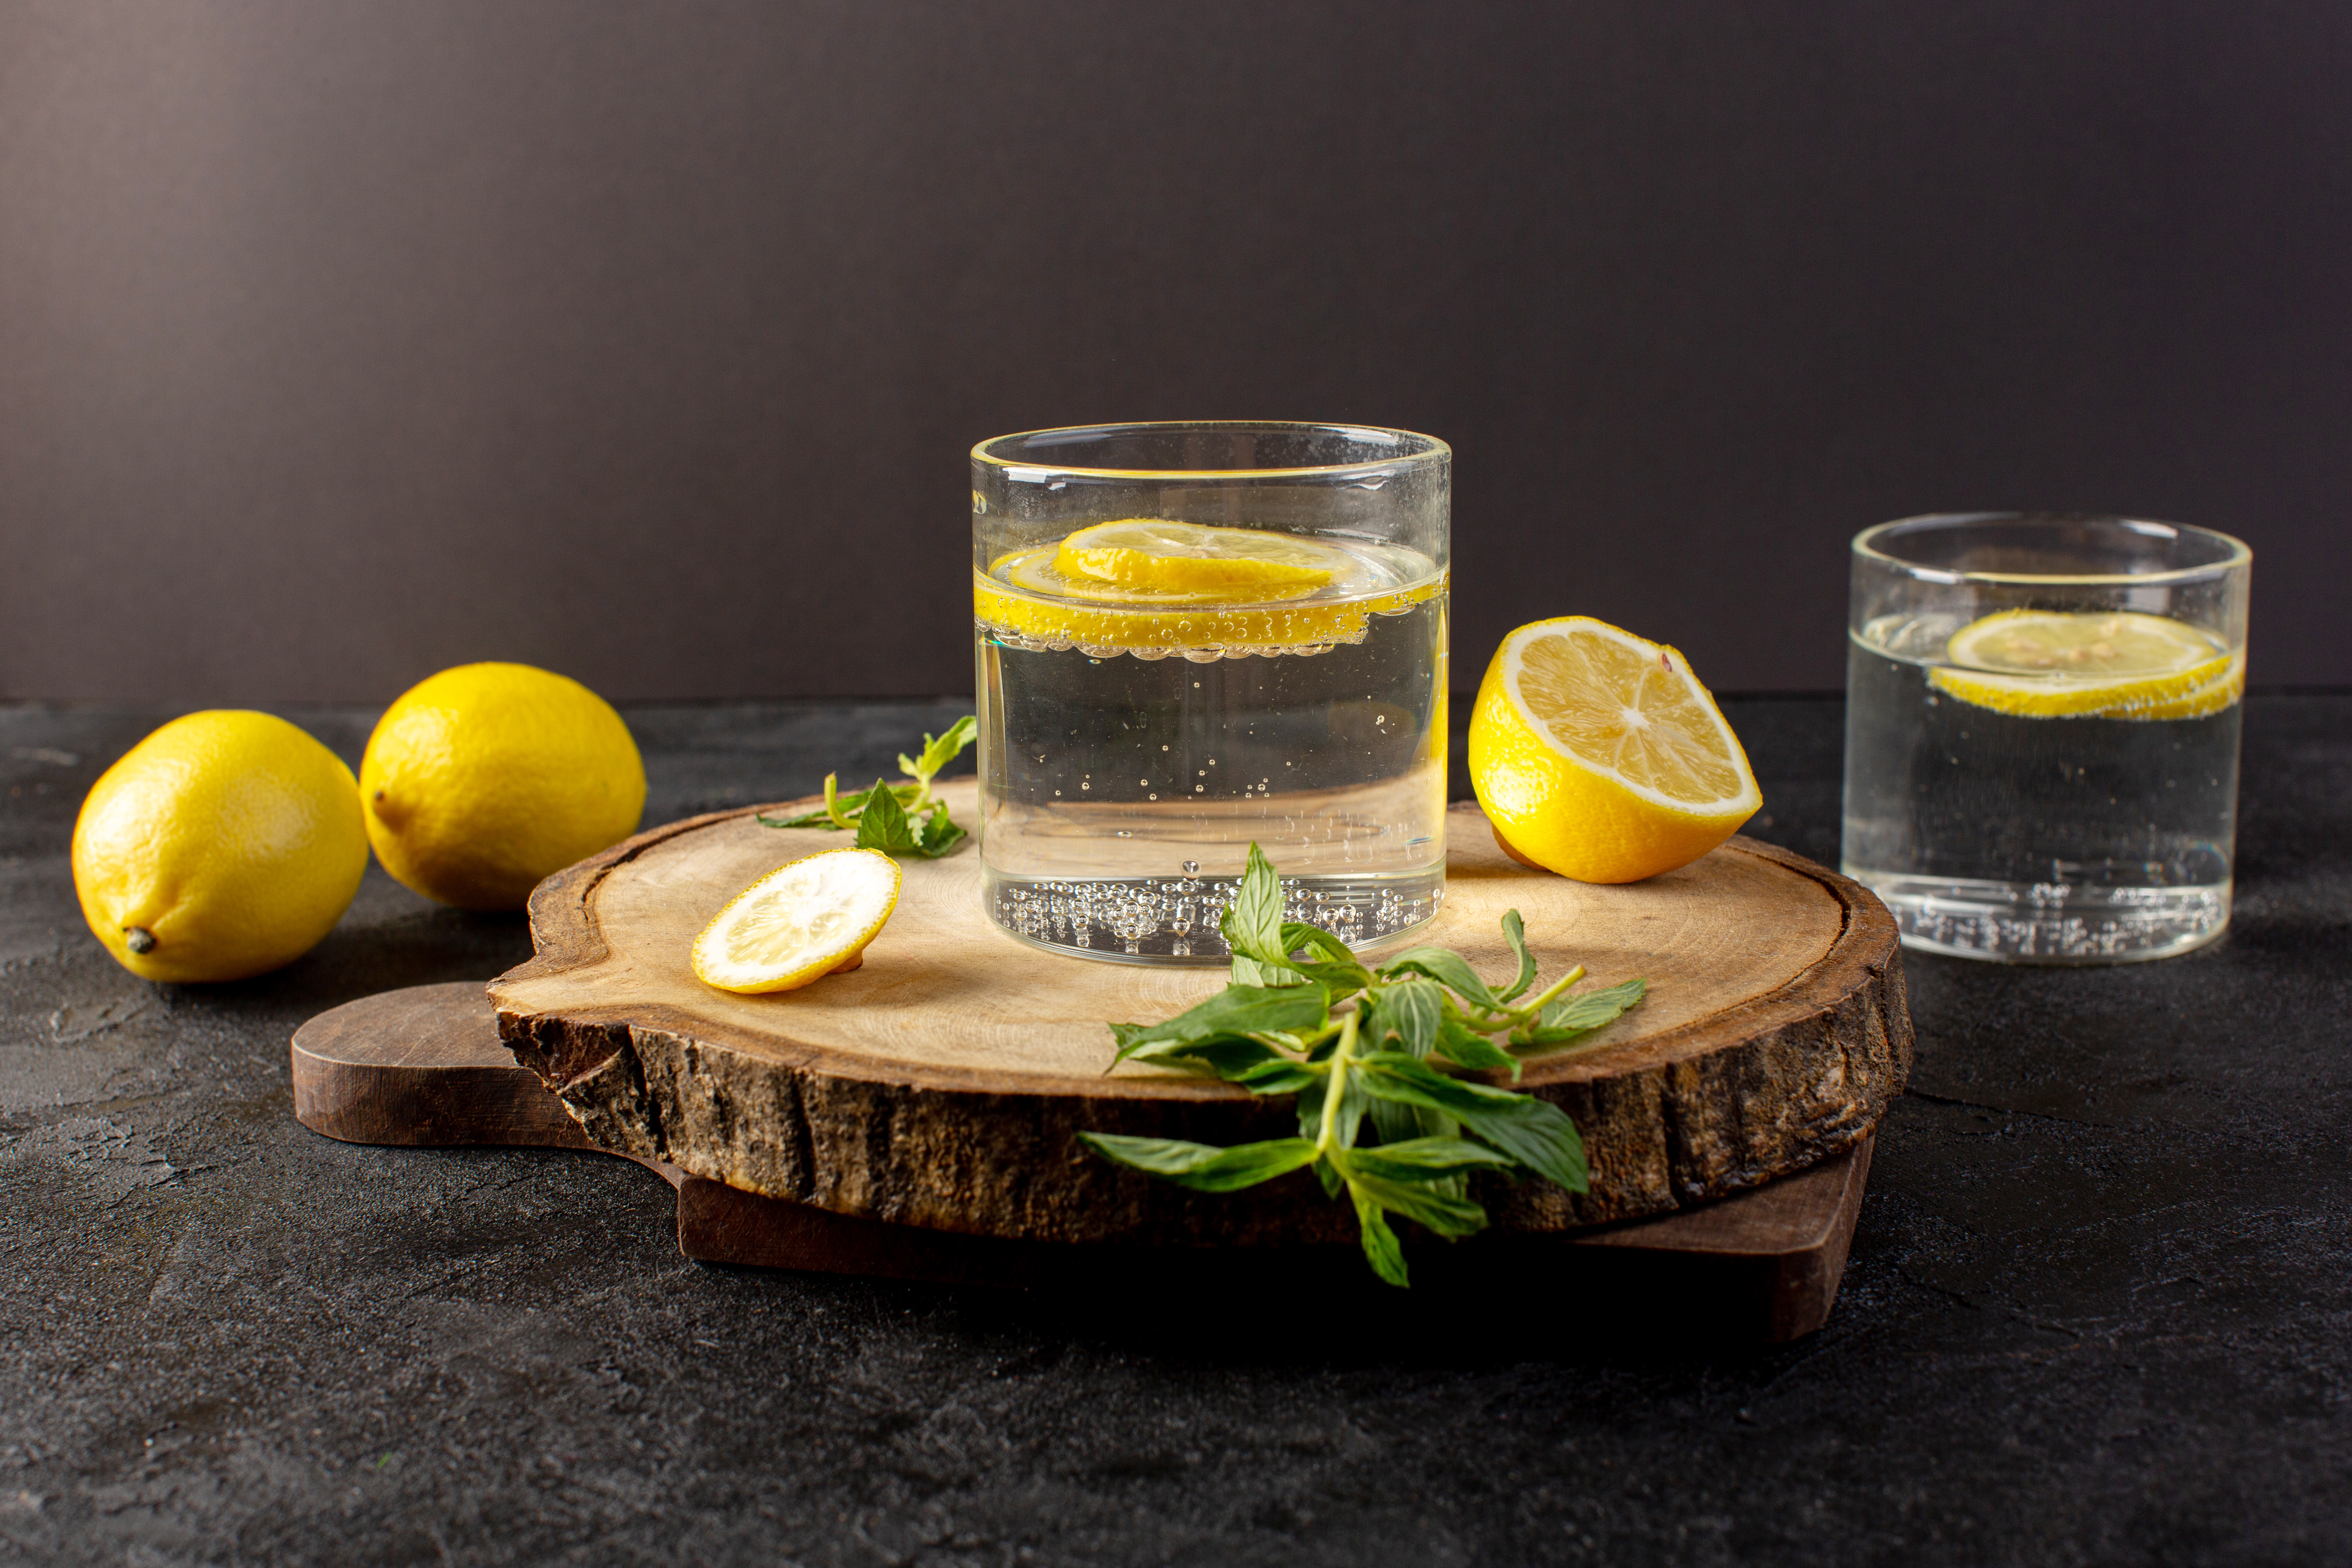 front-view-water-with-lemon-fresh-cool-drink-with-sliced-lemons-along-with-whole-lemons-leaves-inside-transparent-glasses-dark